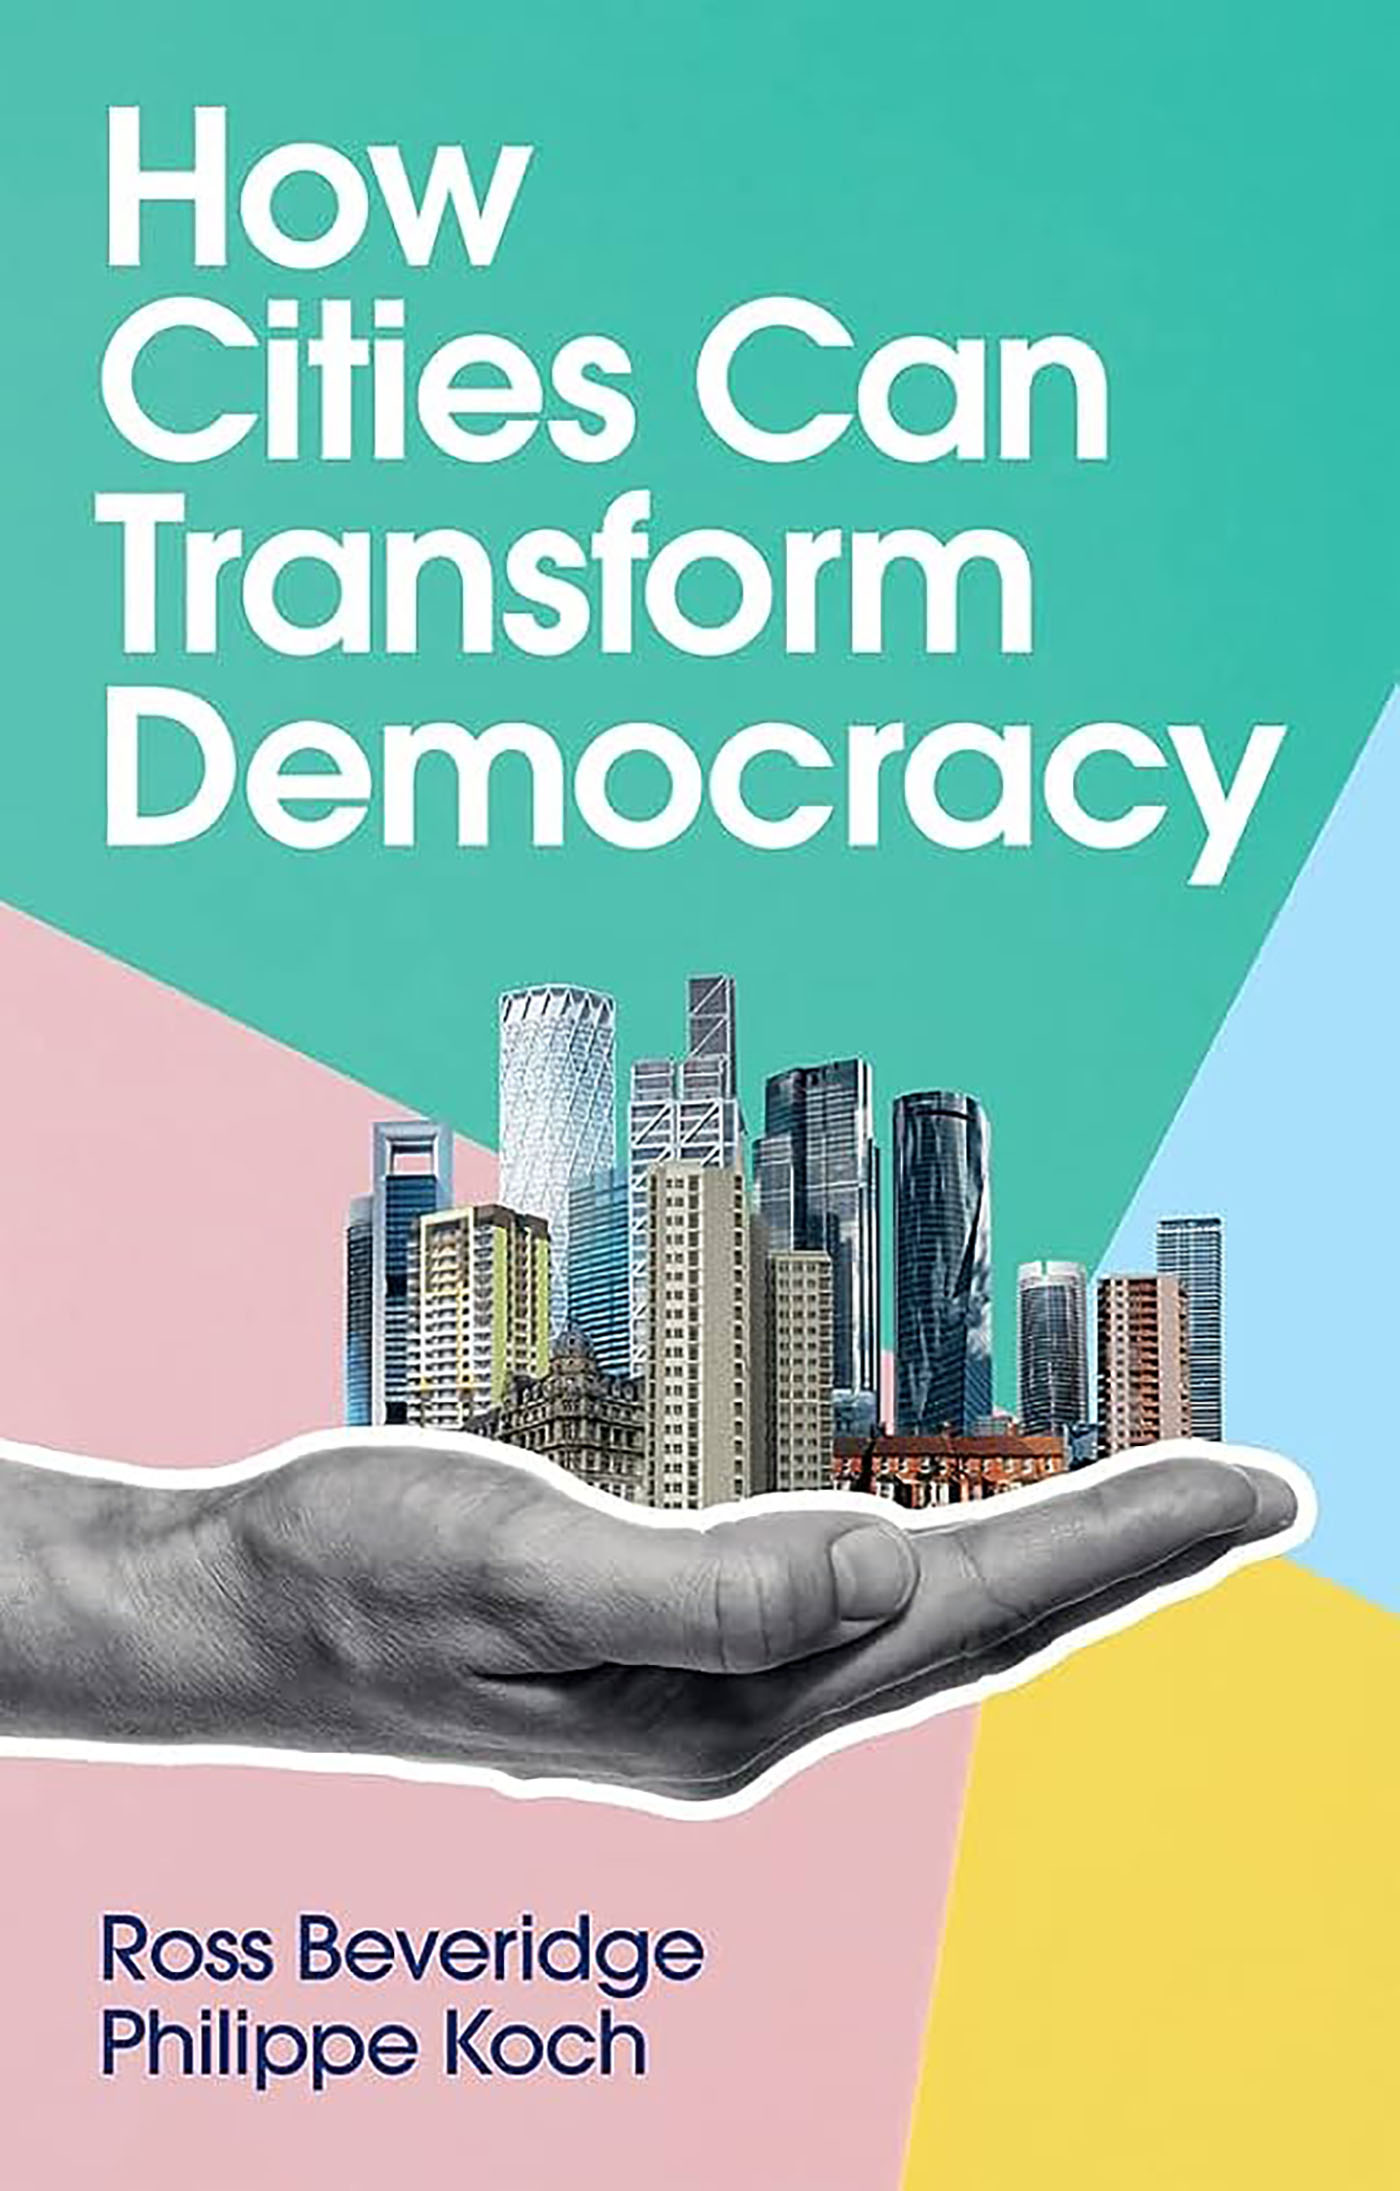 Episode 66 – Book Review Roundtable: How Cities Can Transform Democracy